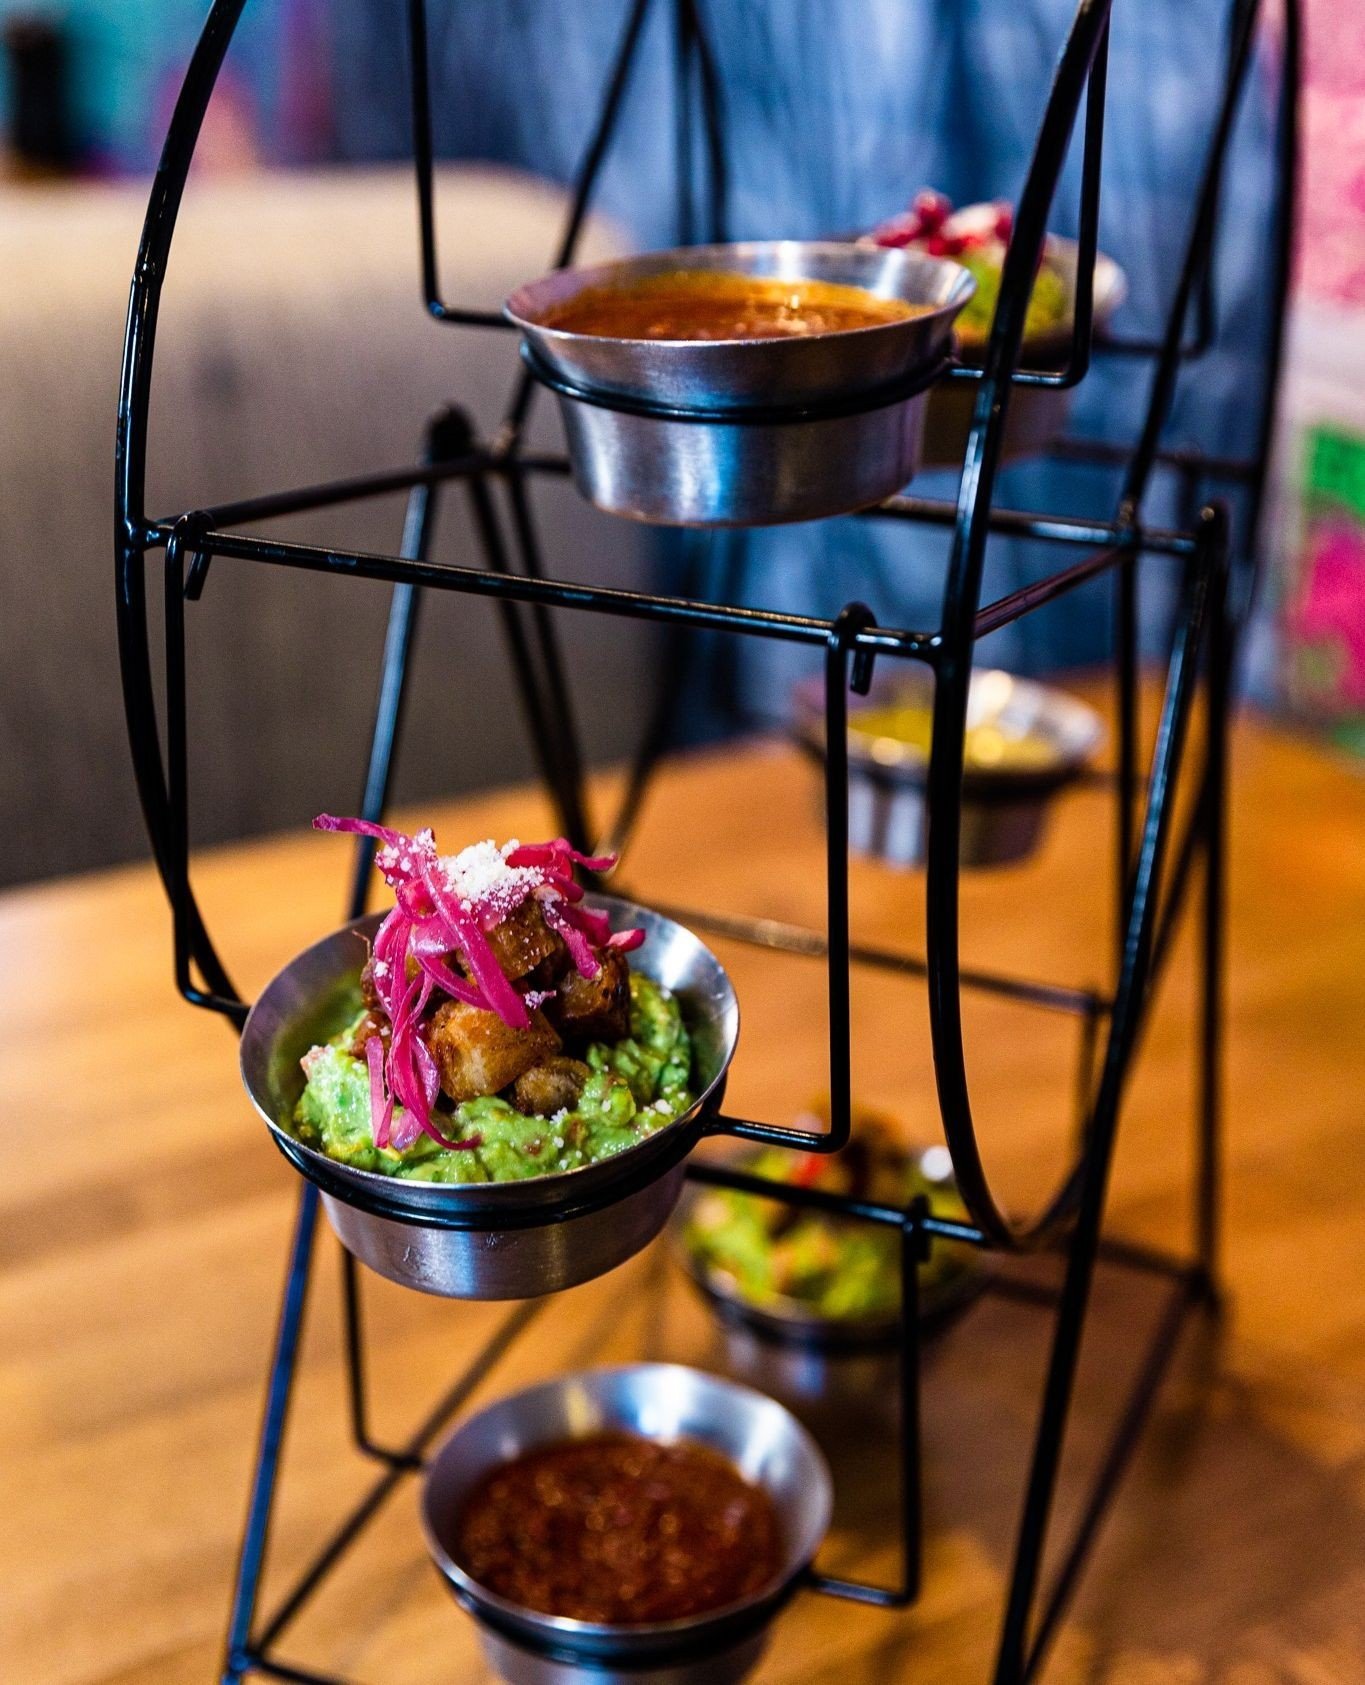 What goes around, comes around...⁠
⁠
But this is actually the one thing you want to come back around 🤩⁠
⁠
🔥Salsa and Guacamole Ferris Wheel Appetizer ⁠
⁠
She's fun, she's considerate and she's consistent 😏⁠
.⁠
.⁠
.⁠
#themexicano #themexicanocomida